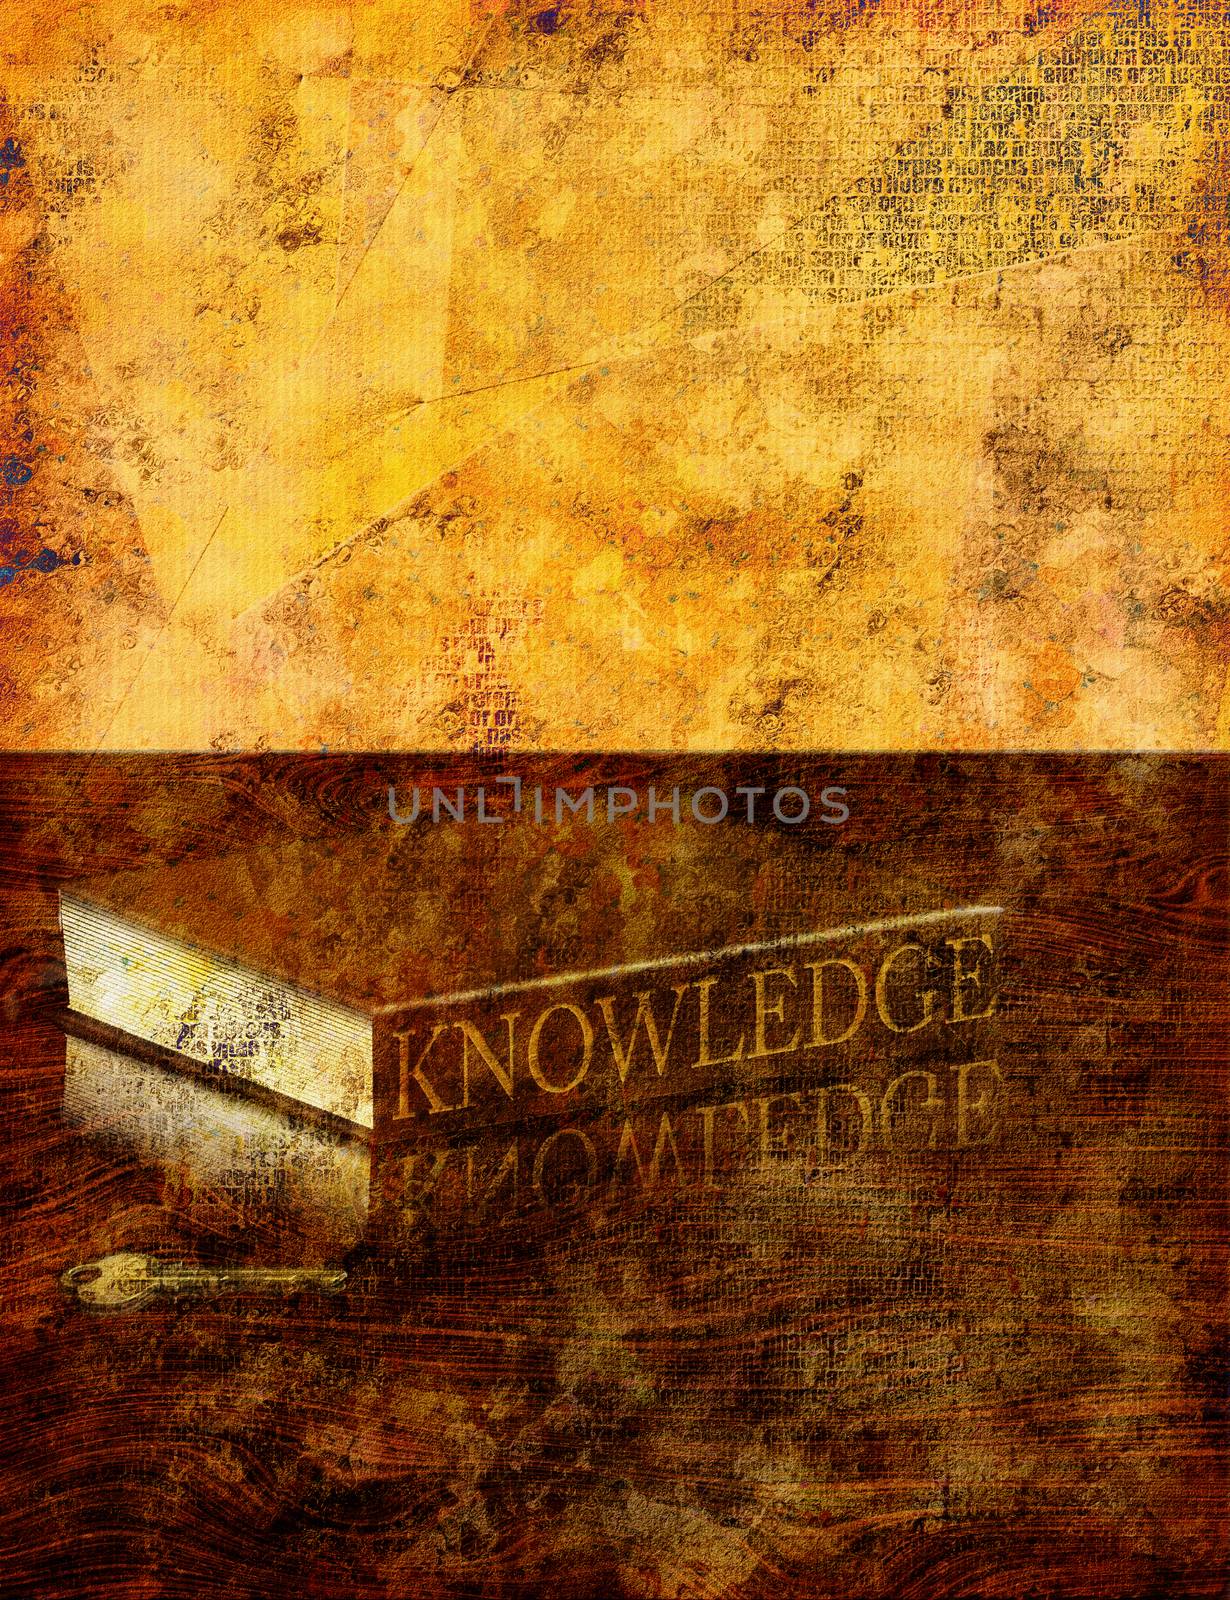 Book of knowledge by applesstock